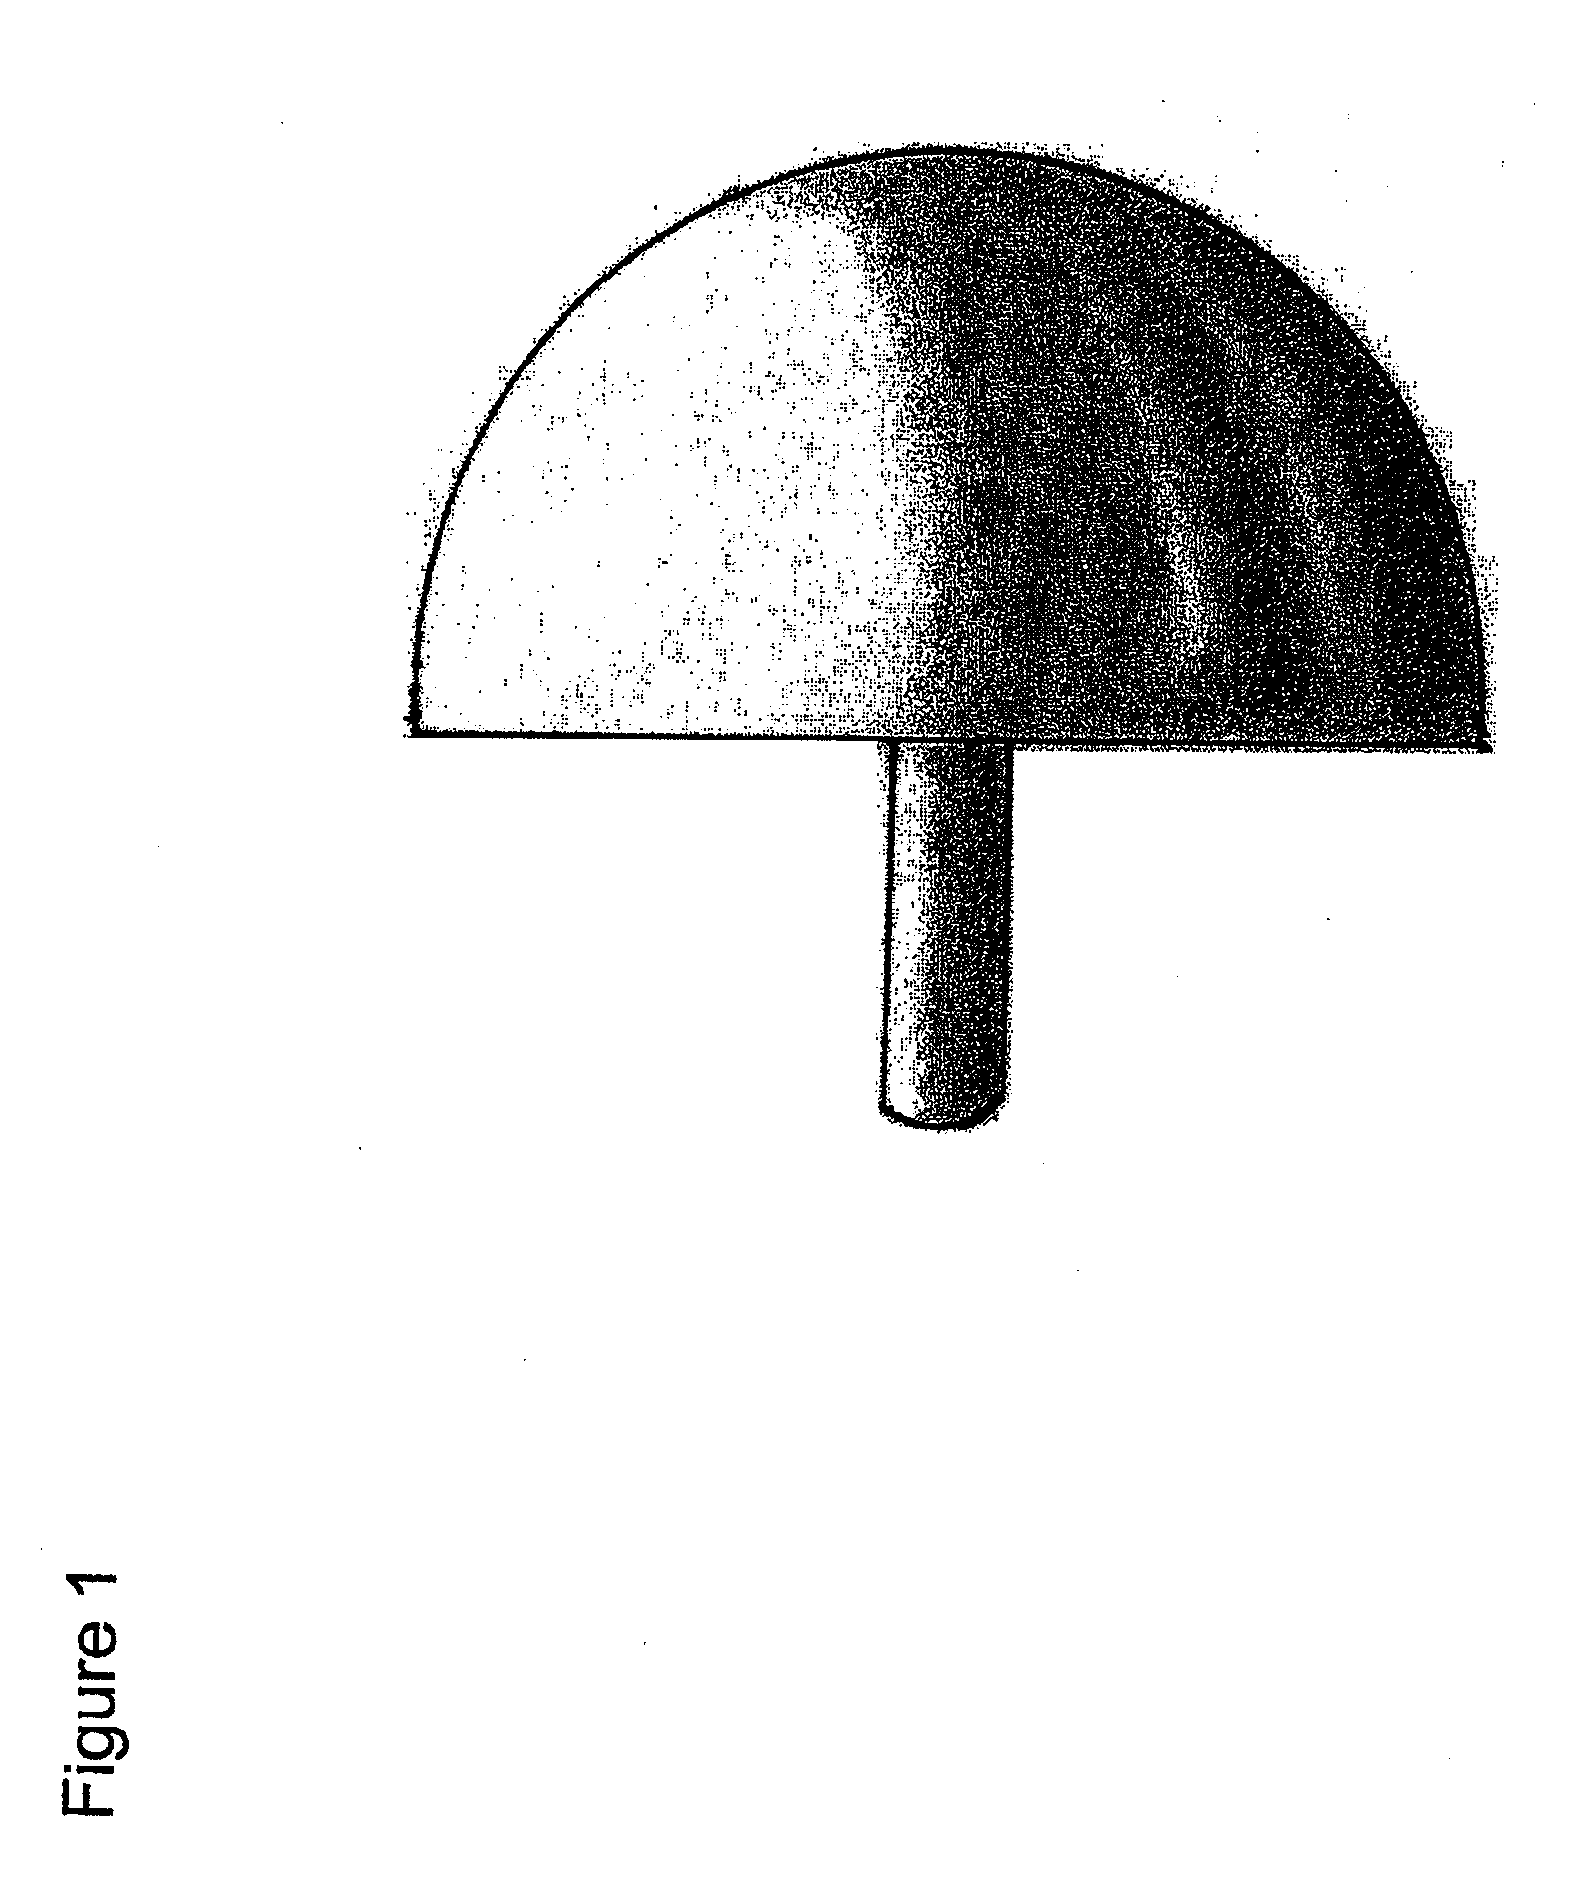 Humeral head resurfacing implant and methods of use thereof